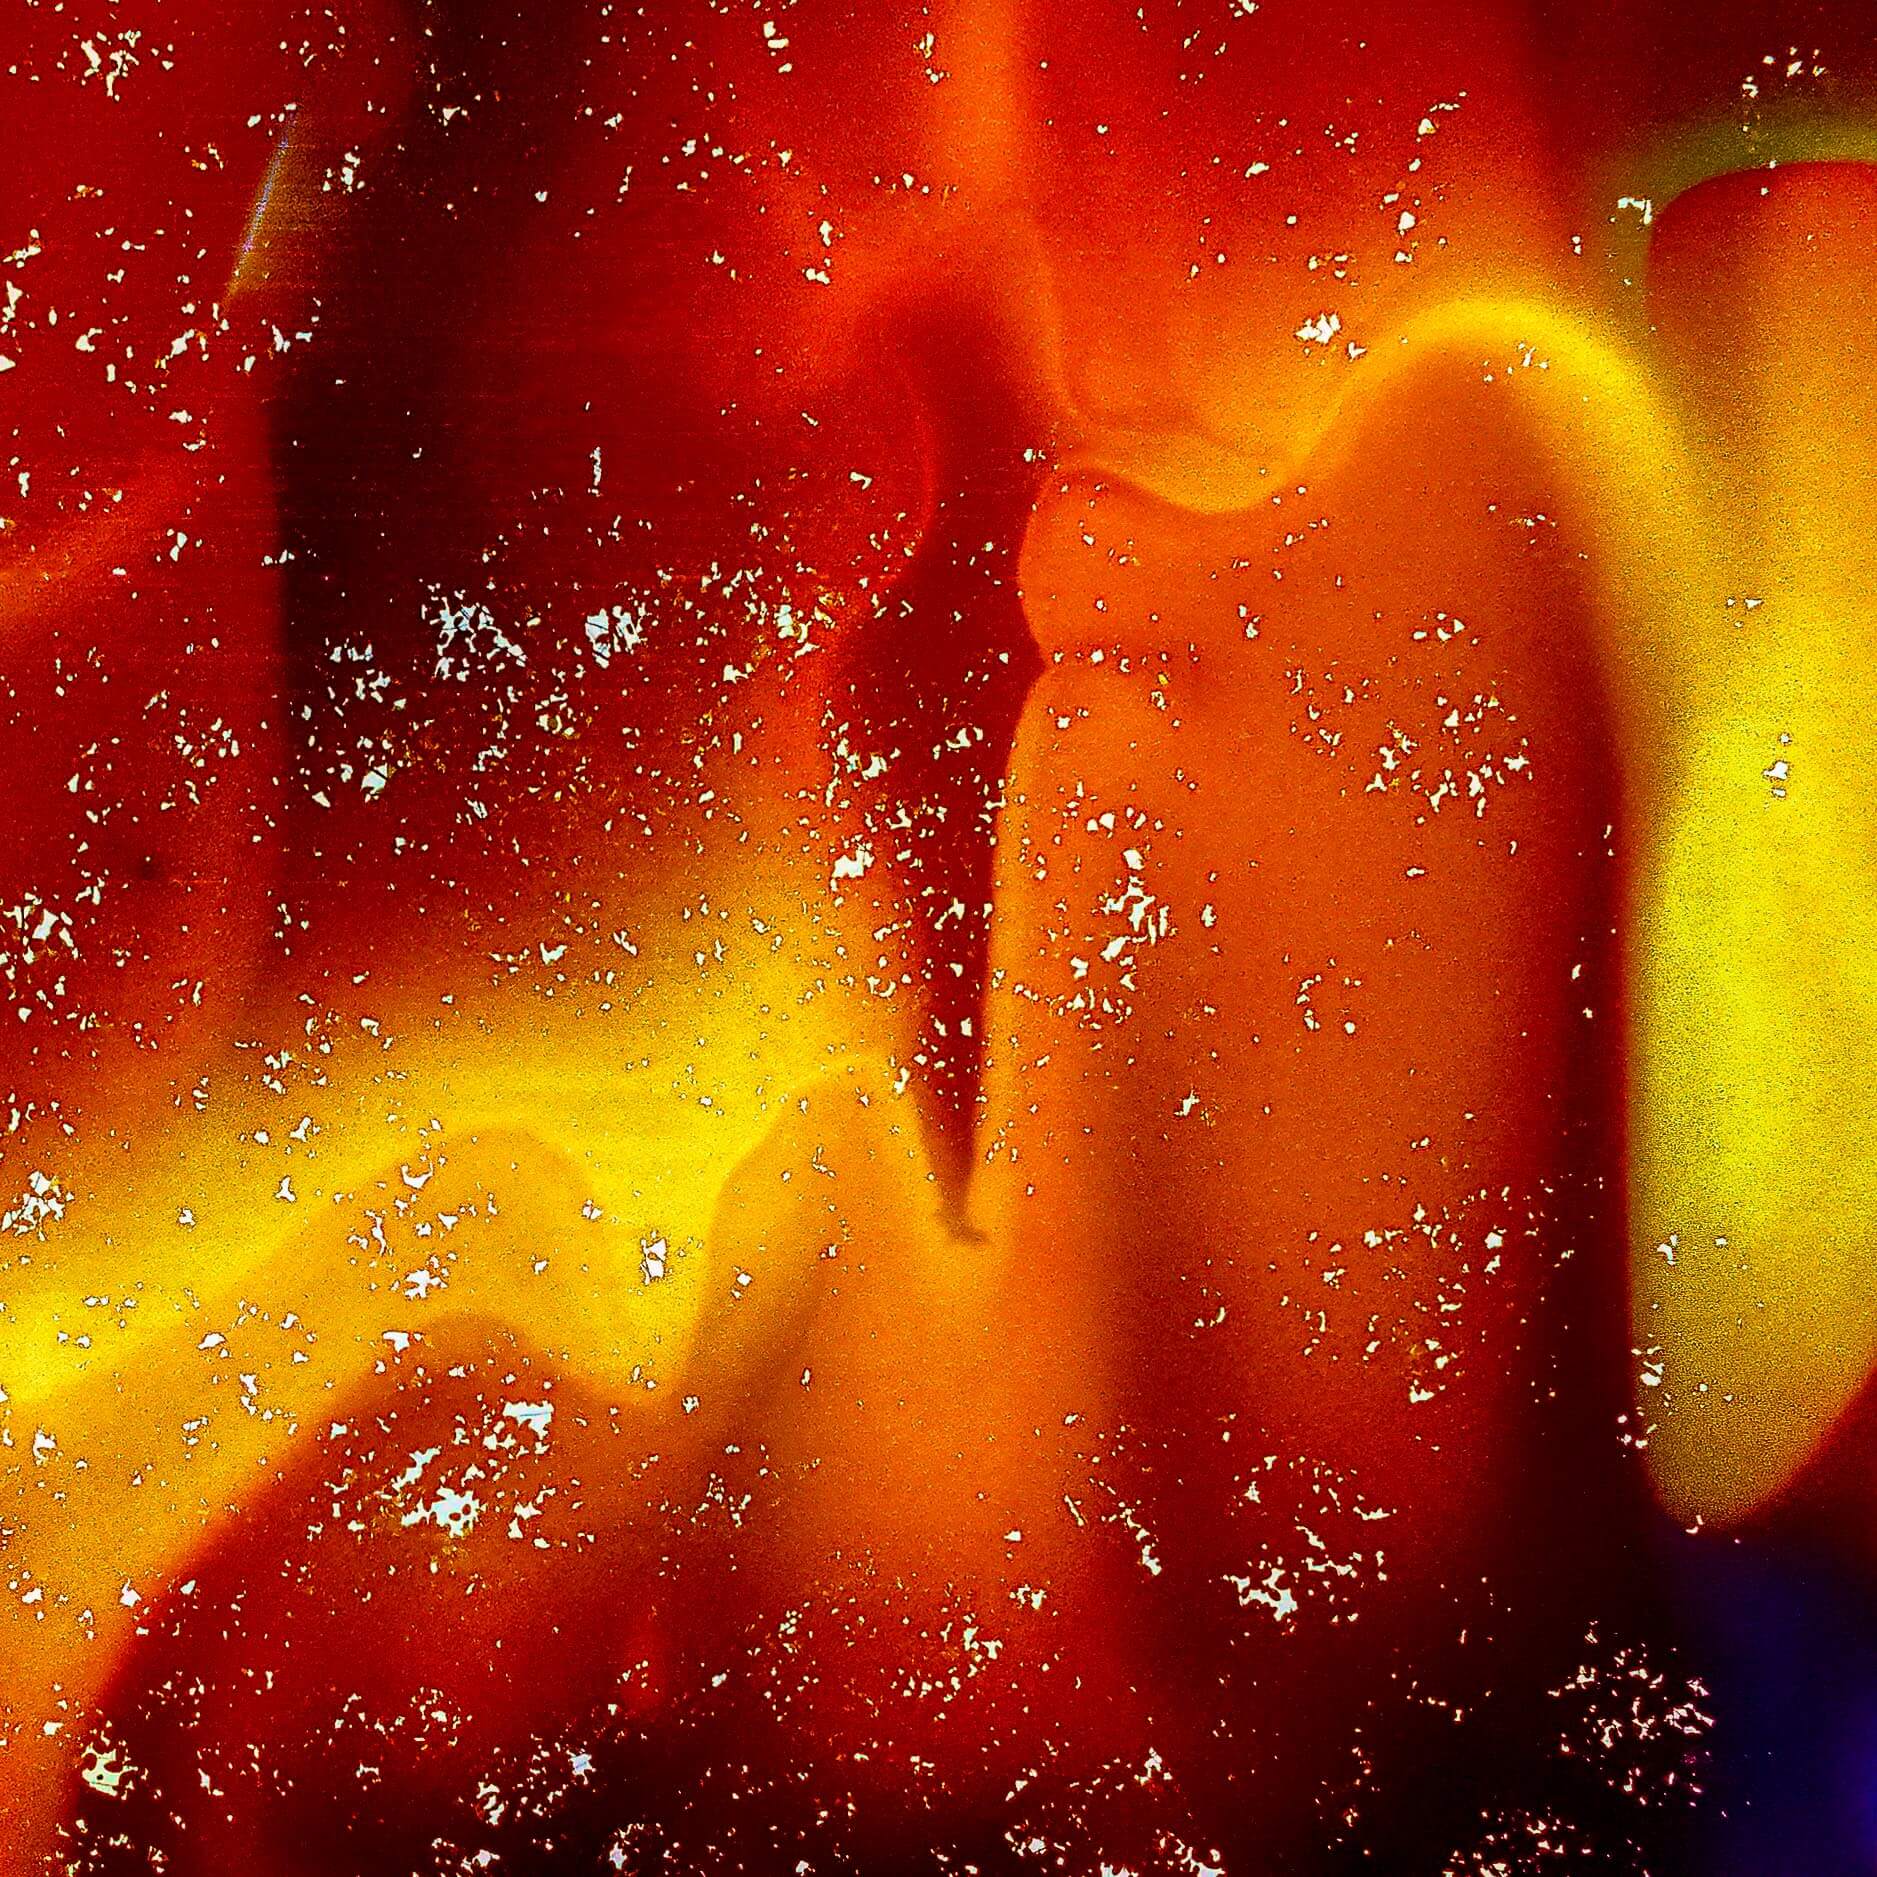 This image shows "Flaming," an artwork with bright reds, oranges, and yellows, and specks of white like sparks in a fire, evoking strong emotions and the warmth of flames.